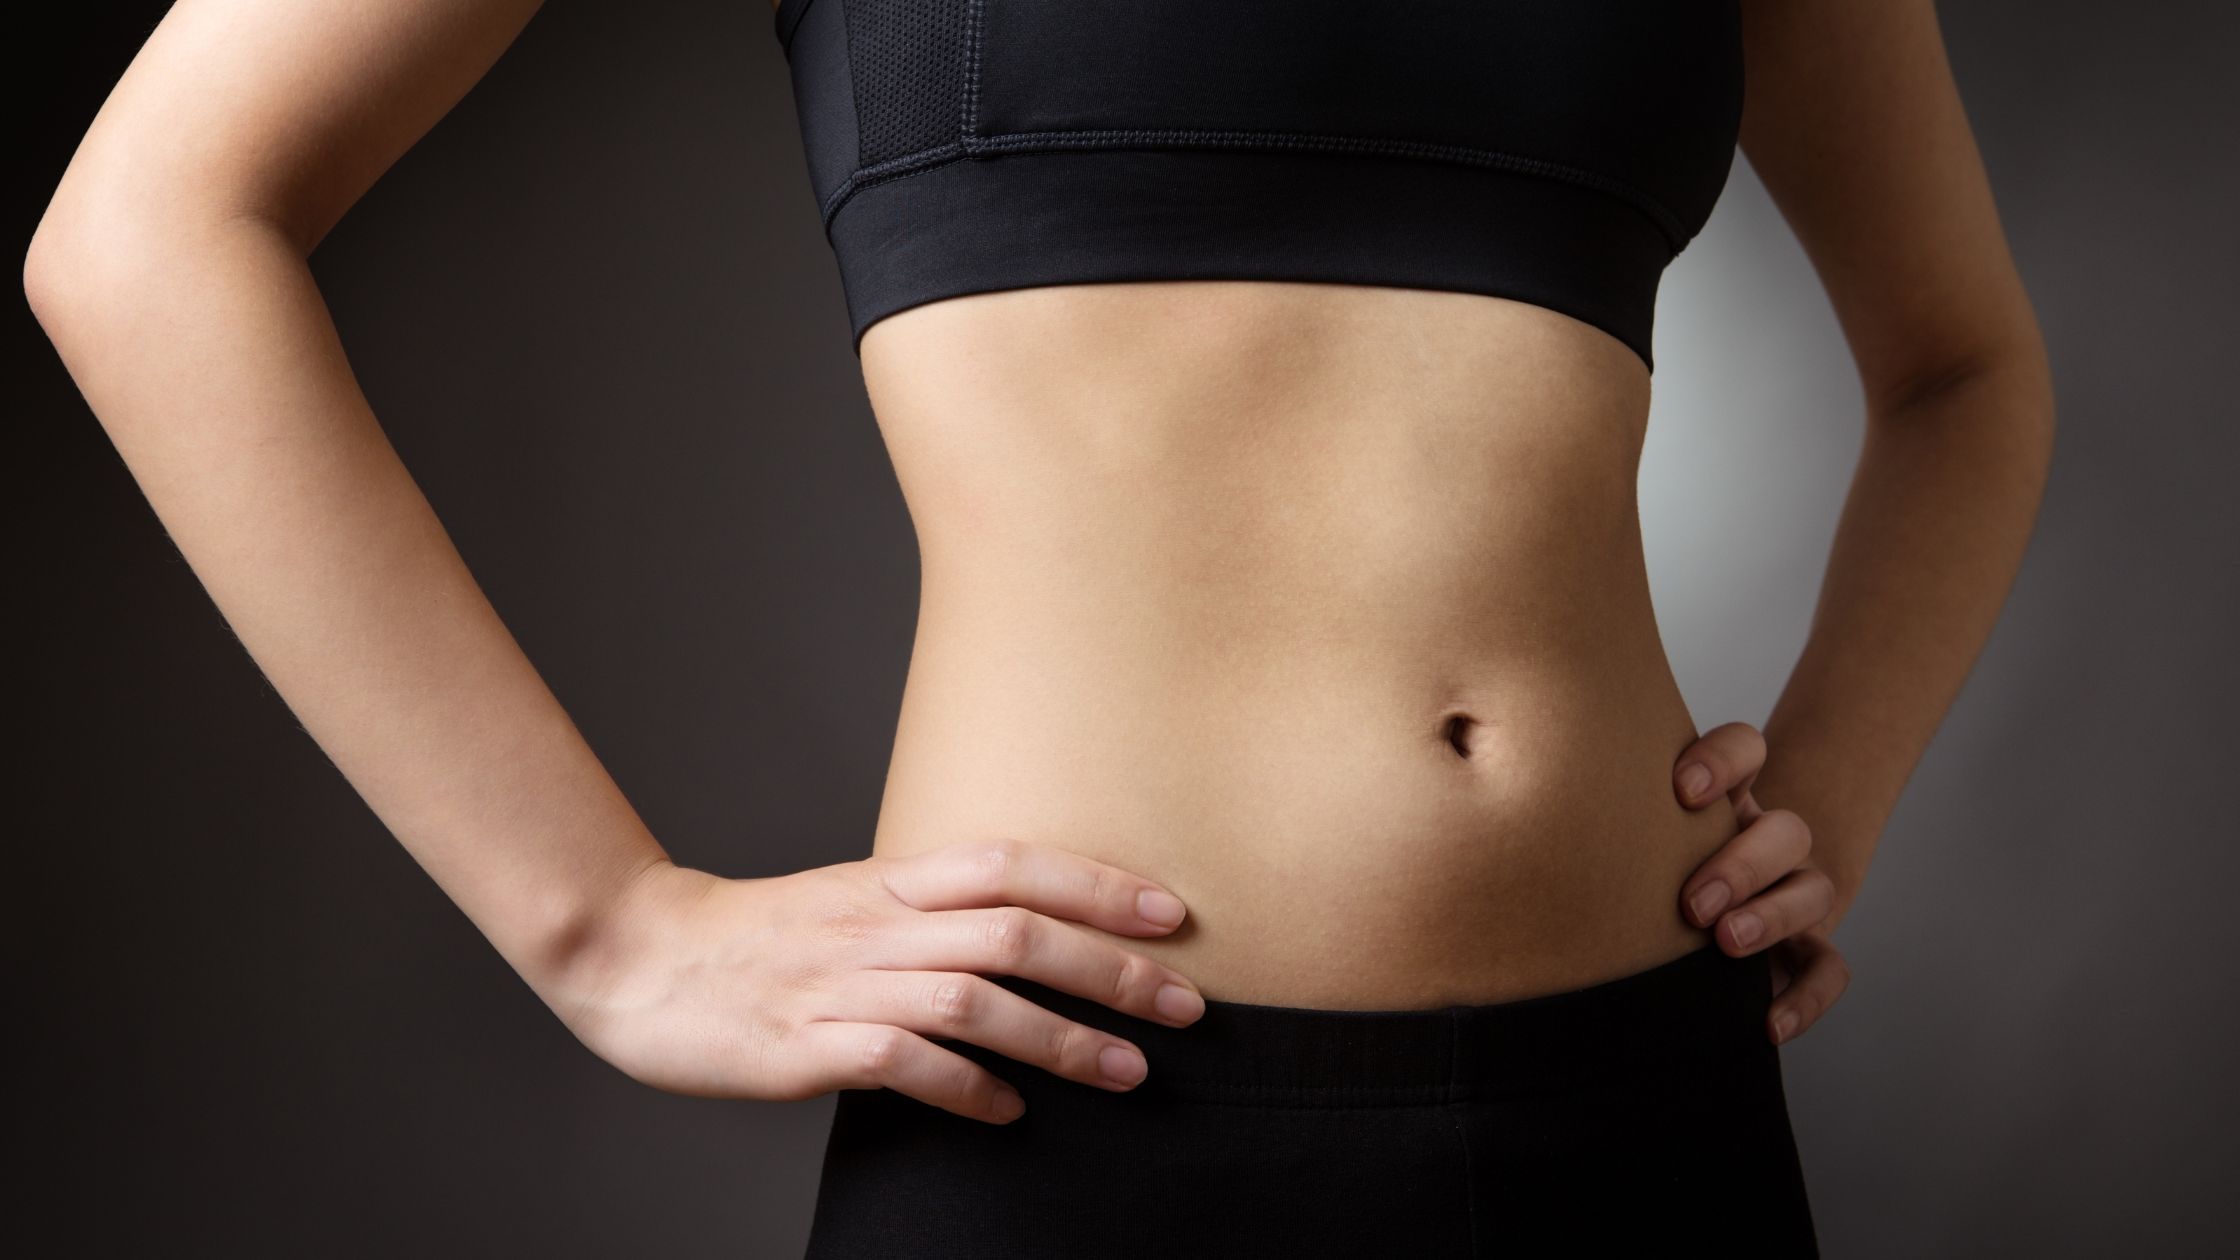 How long do CoolSculpting results last?